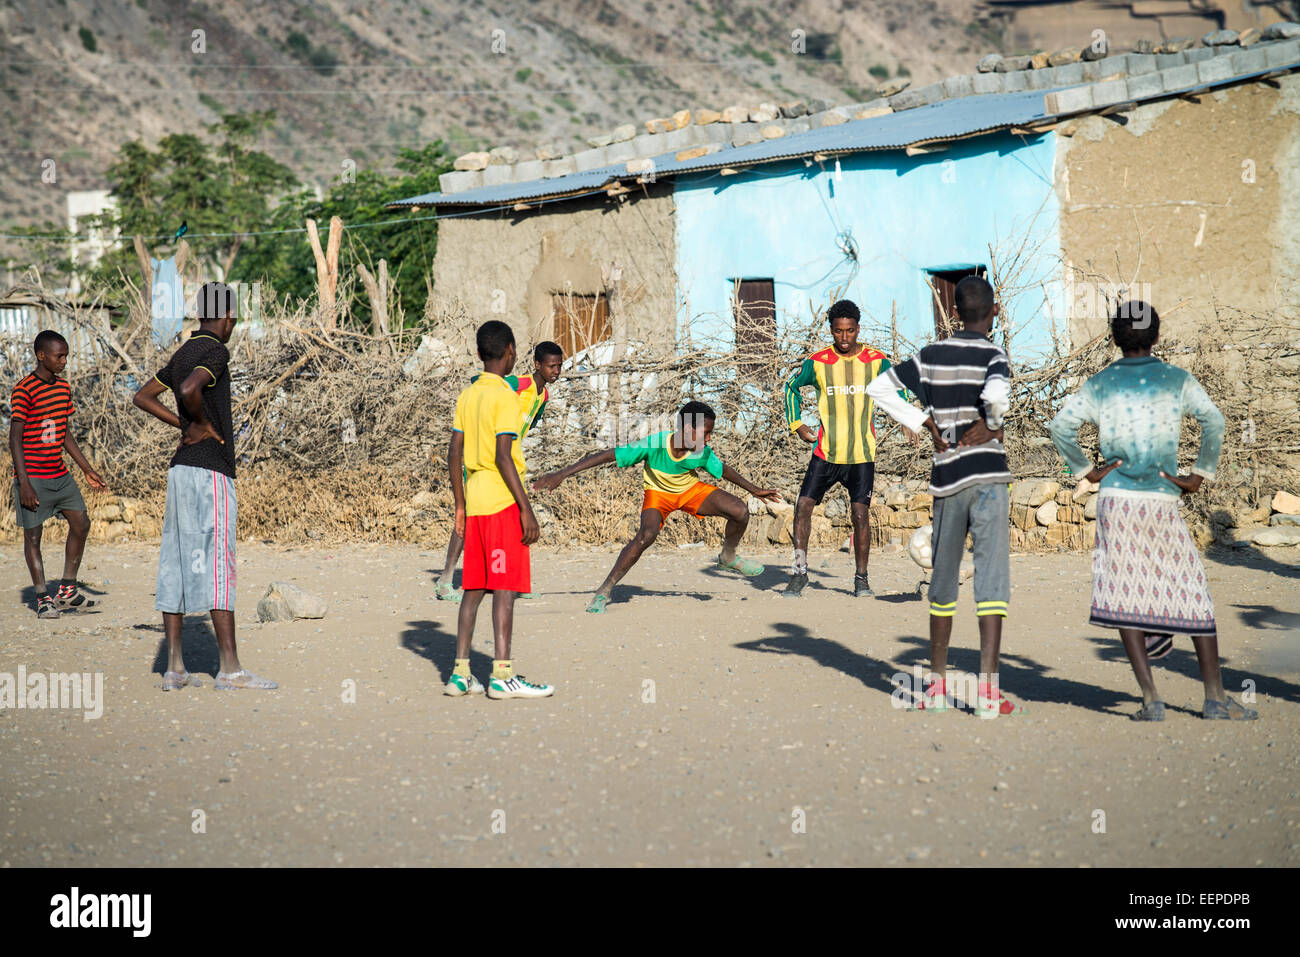 Children play football on a dirt pitch in Abala, Ethiopia, Africa Stock Photo